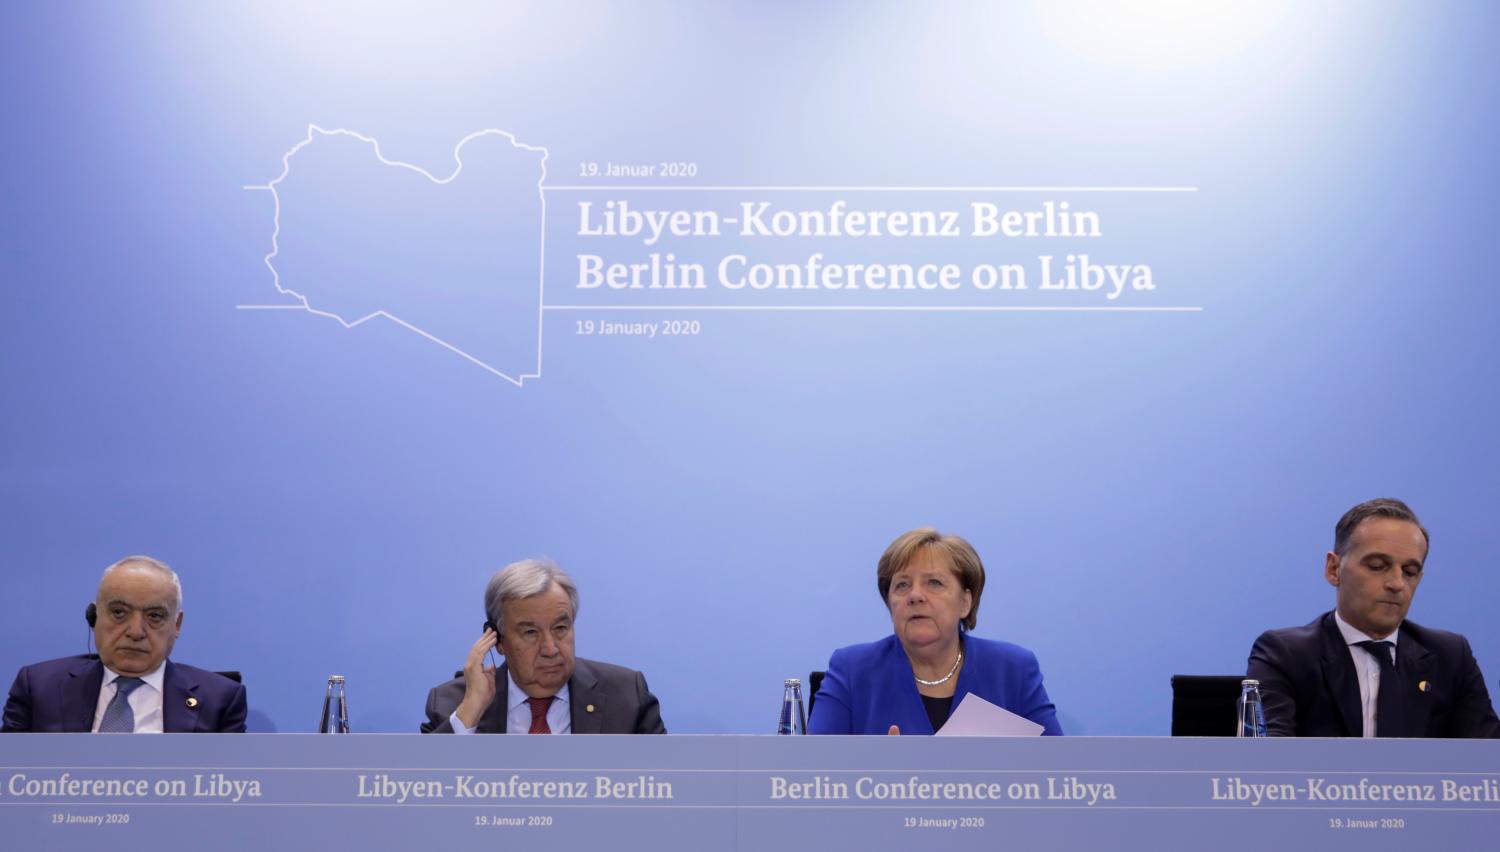 U.N. Envoy for Libya Ghassan Salame, United Nations Secretary-General Antonio Guterres, Germany's Chancellor Angela Merkel and Germany's Foreign Minister Heiko Maas attend a news conference after the Libya summit in Berlin, Germany, January 19, 2020. REUTERS/Axel Schmidt/Pool